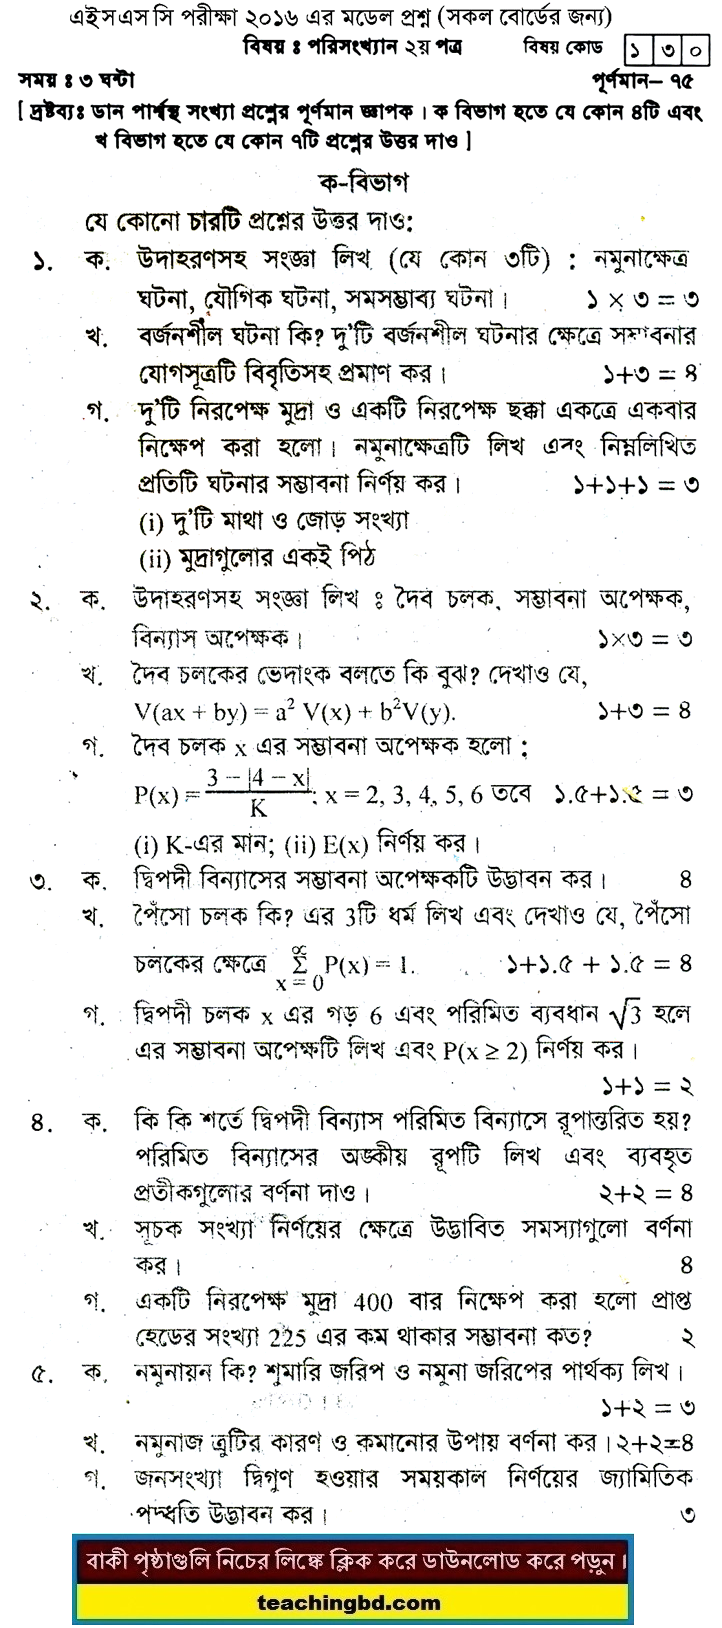 Statistics 2 Suggestion and Question Patterns of HSC Examination 2016-10